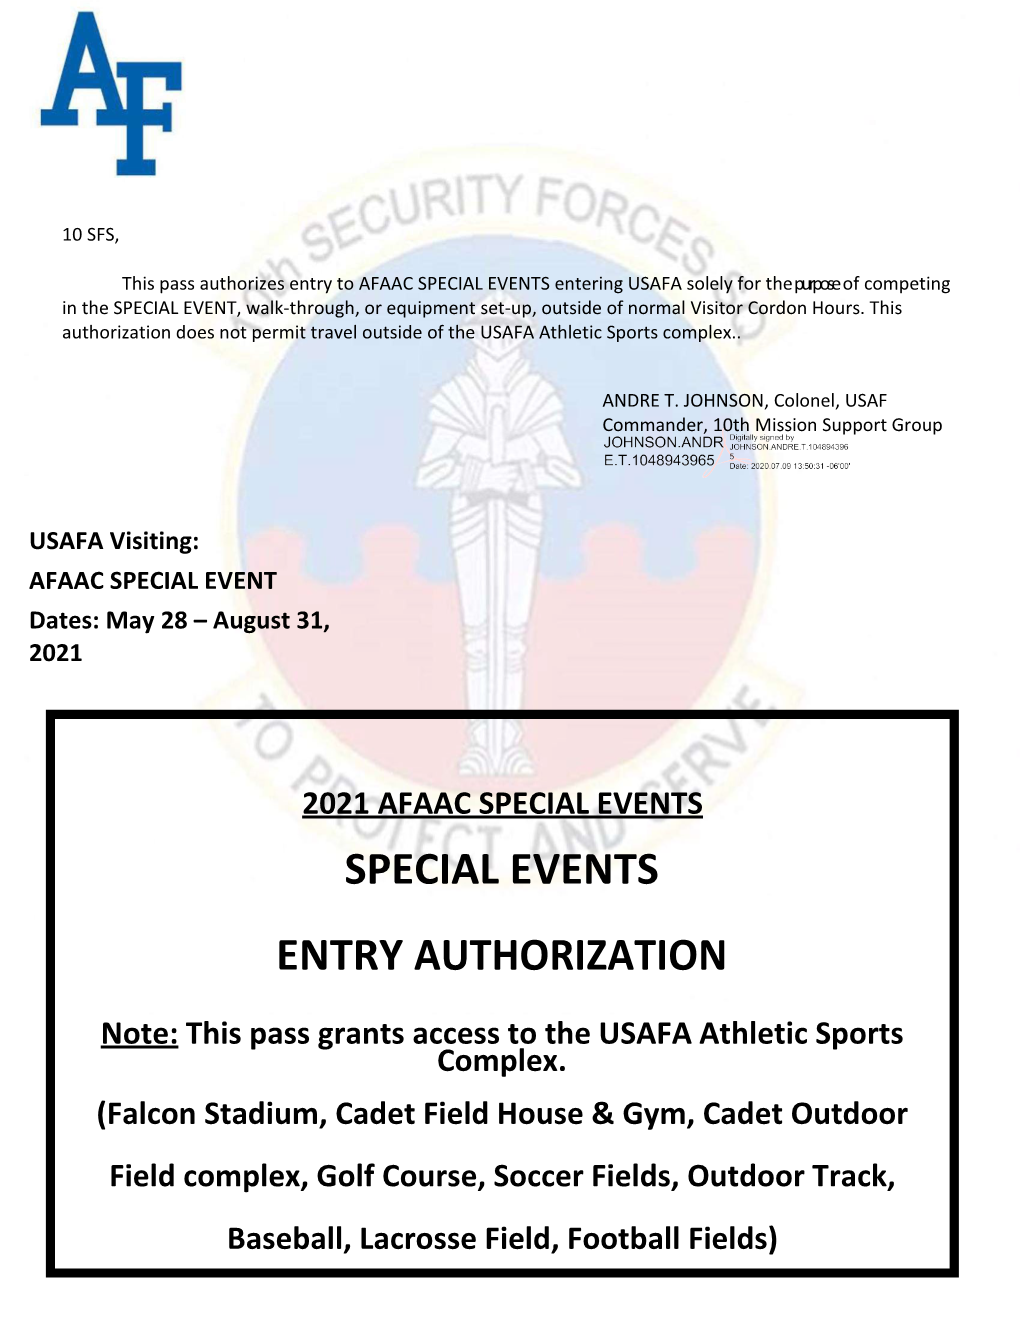 Special Events Entry Authorization